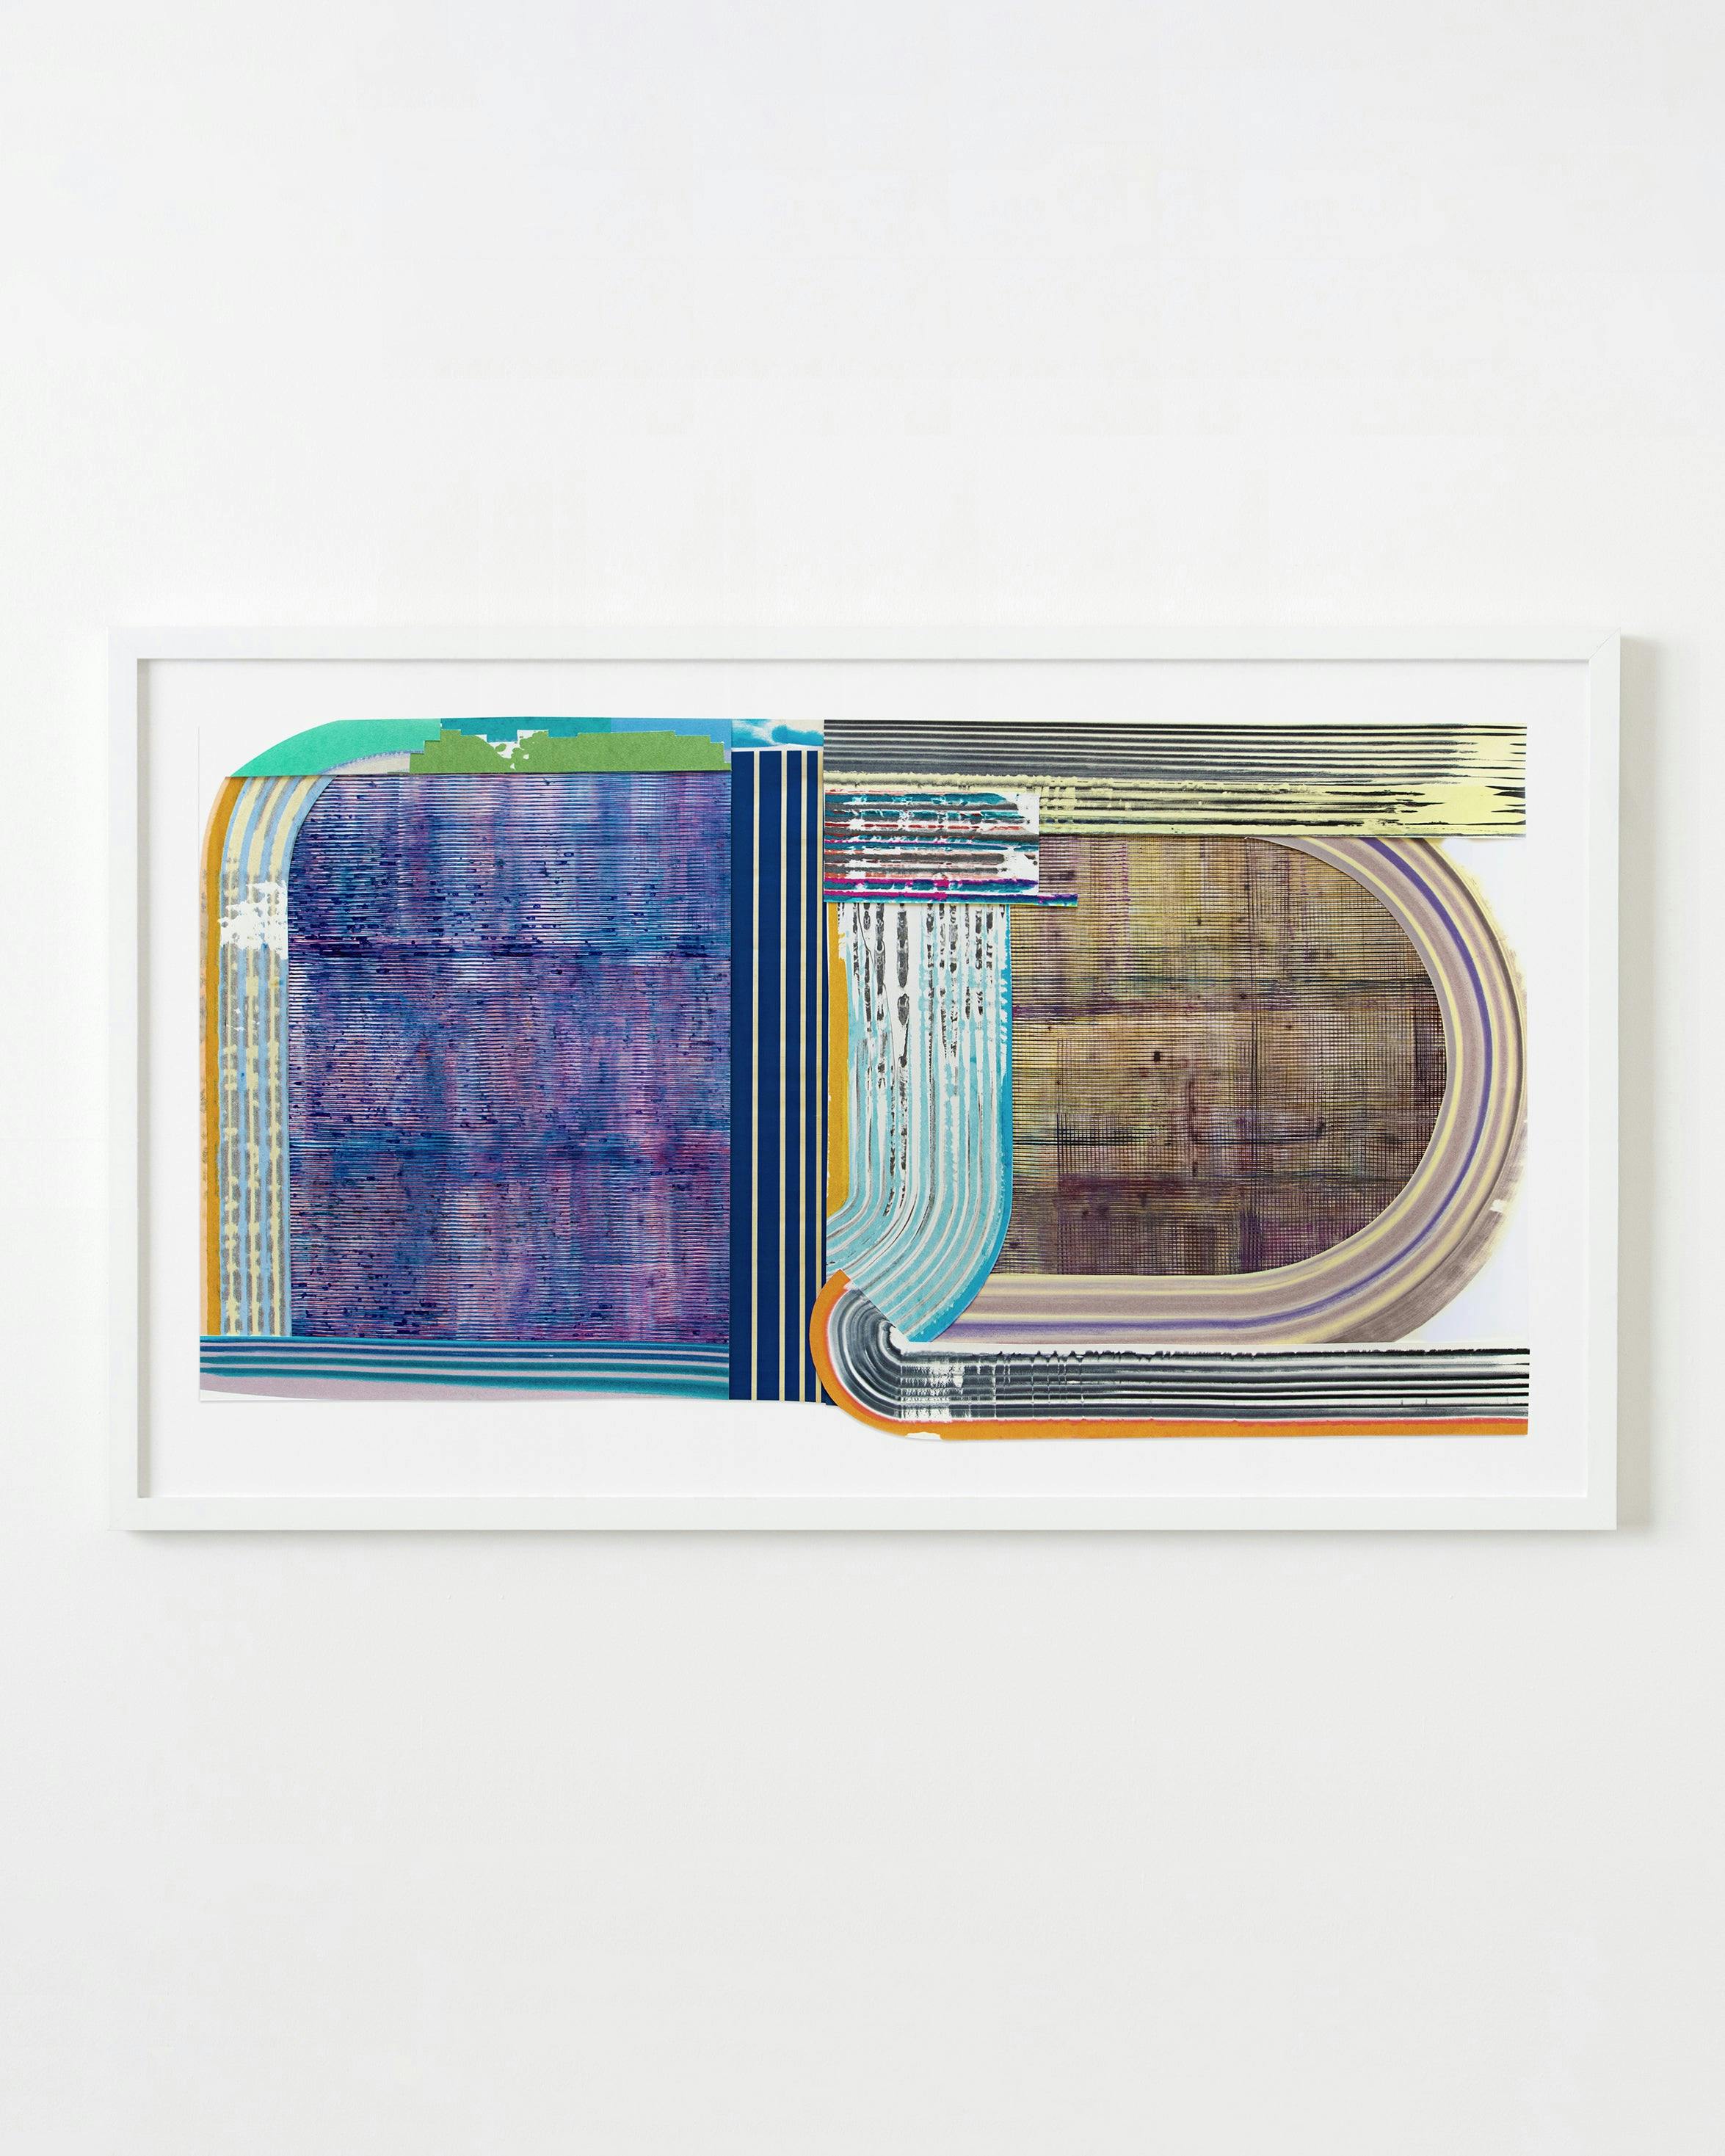 Painting by Erik Barthels titled "Reverse Relic".